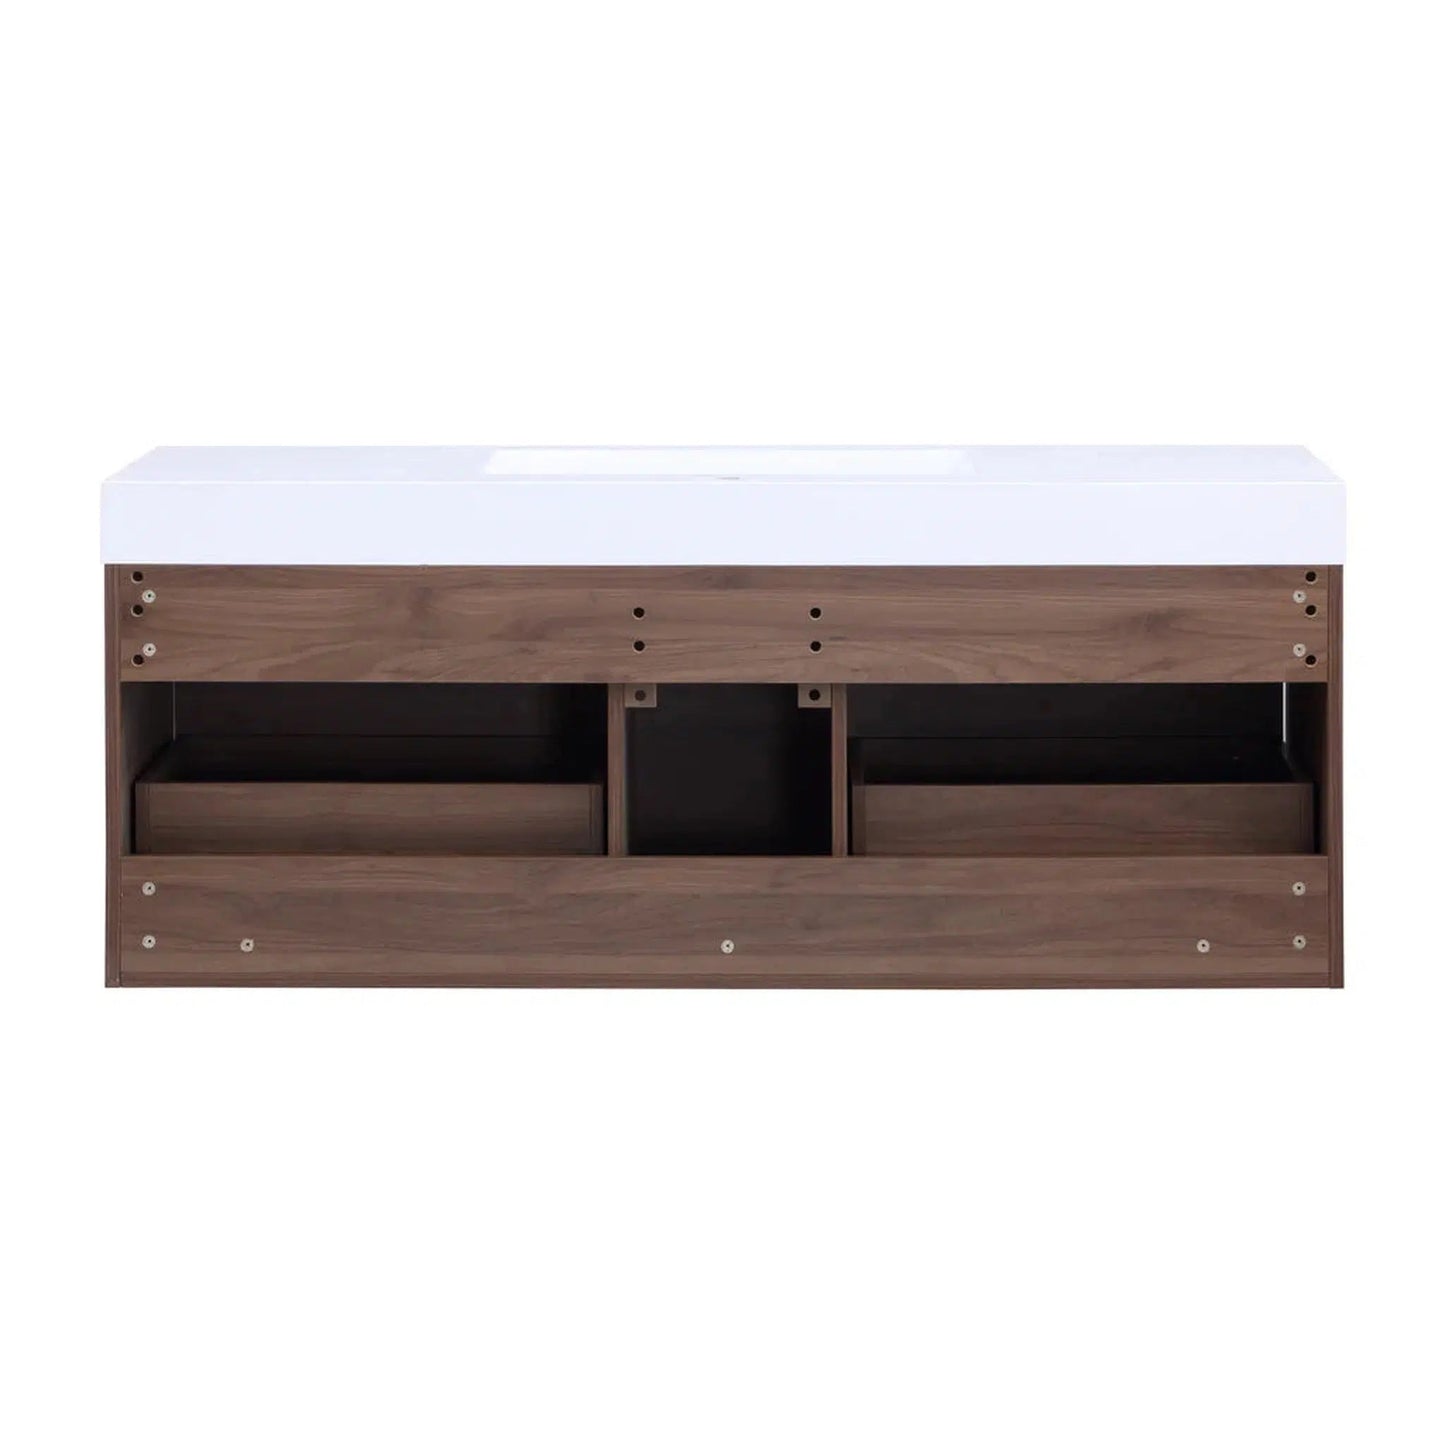 Stufurhome Eternal 59" Walnut Wall Mounted Bathroom Vanity With Rectangular Single Resin Sink, 2 Slow Close Drawers and One Pre-Drilled Faucet Hole